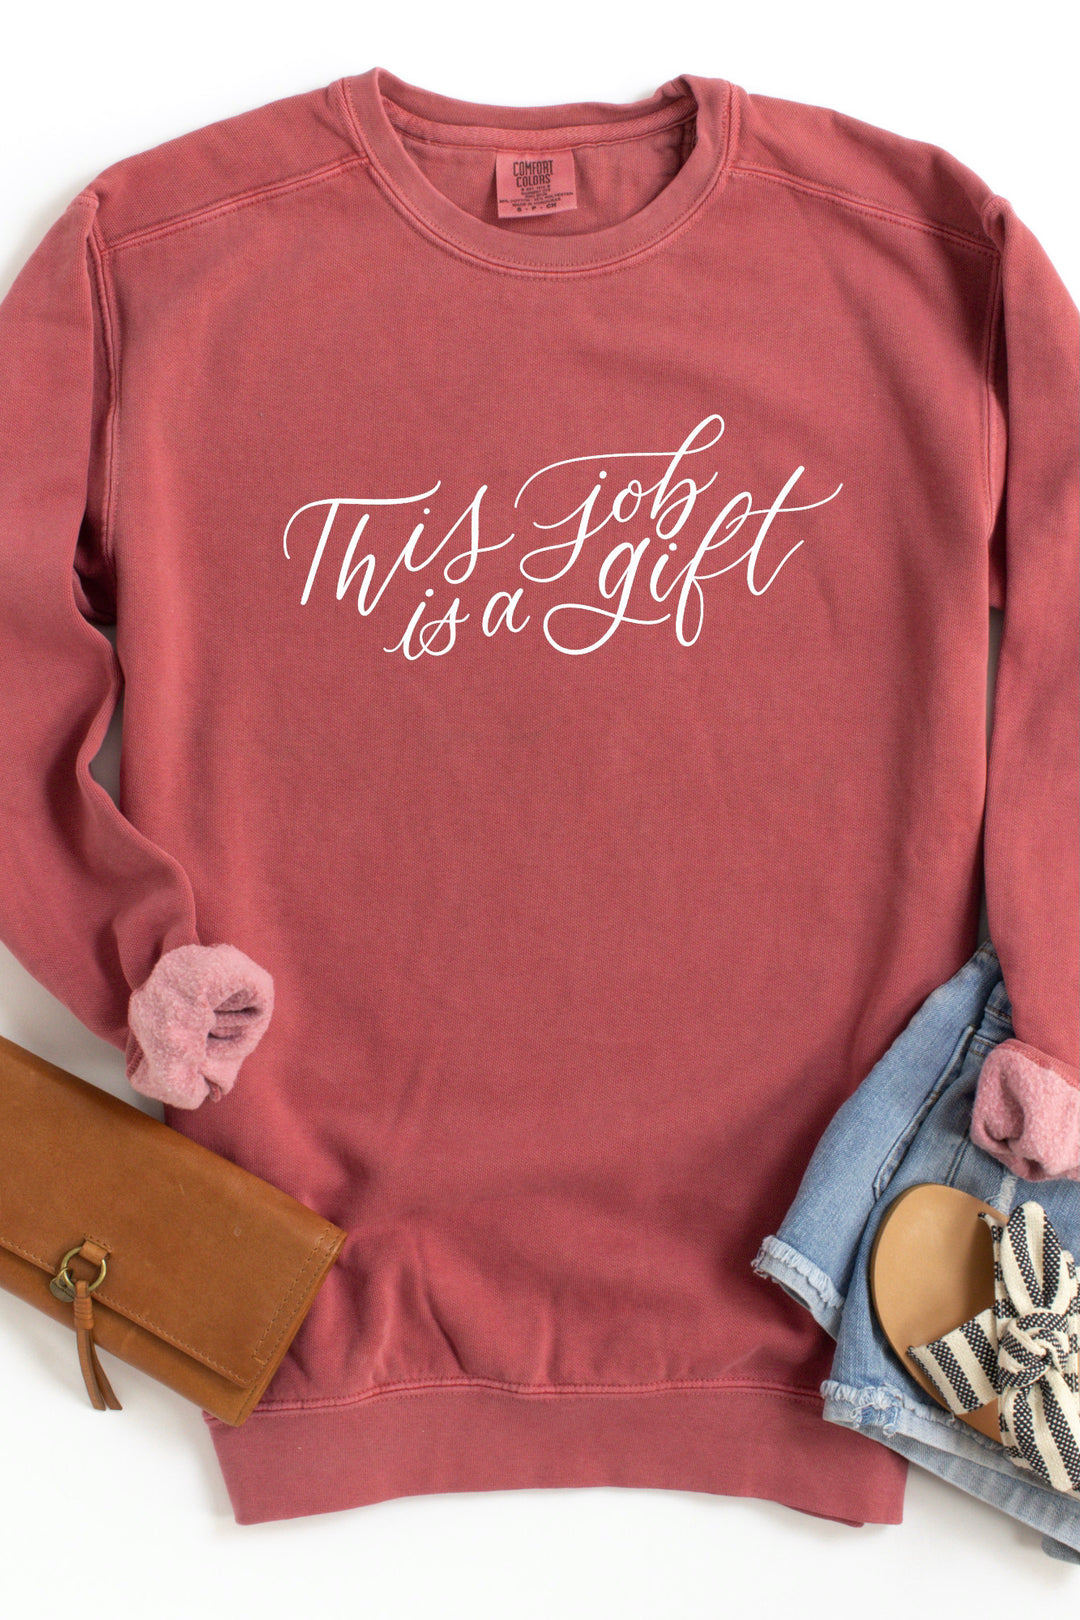 "This Job is a Gift" Crewneck Pullover